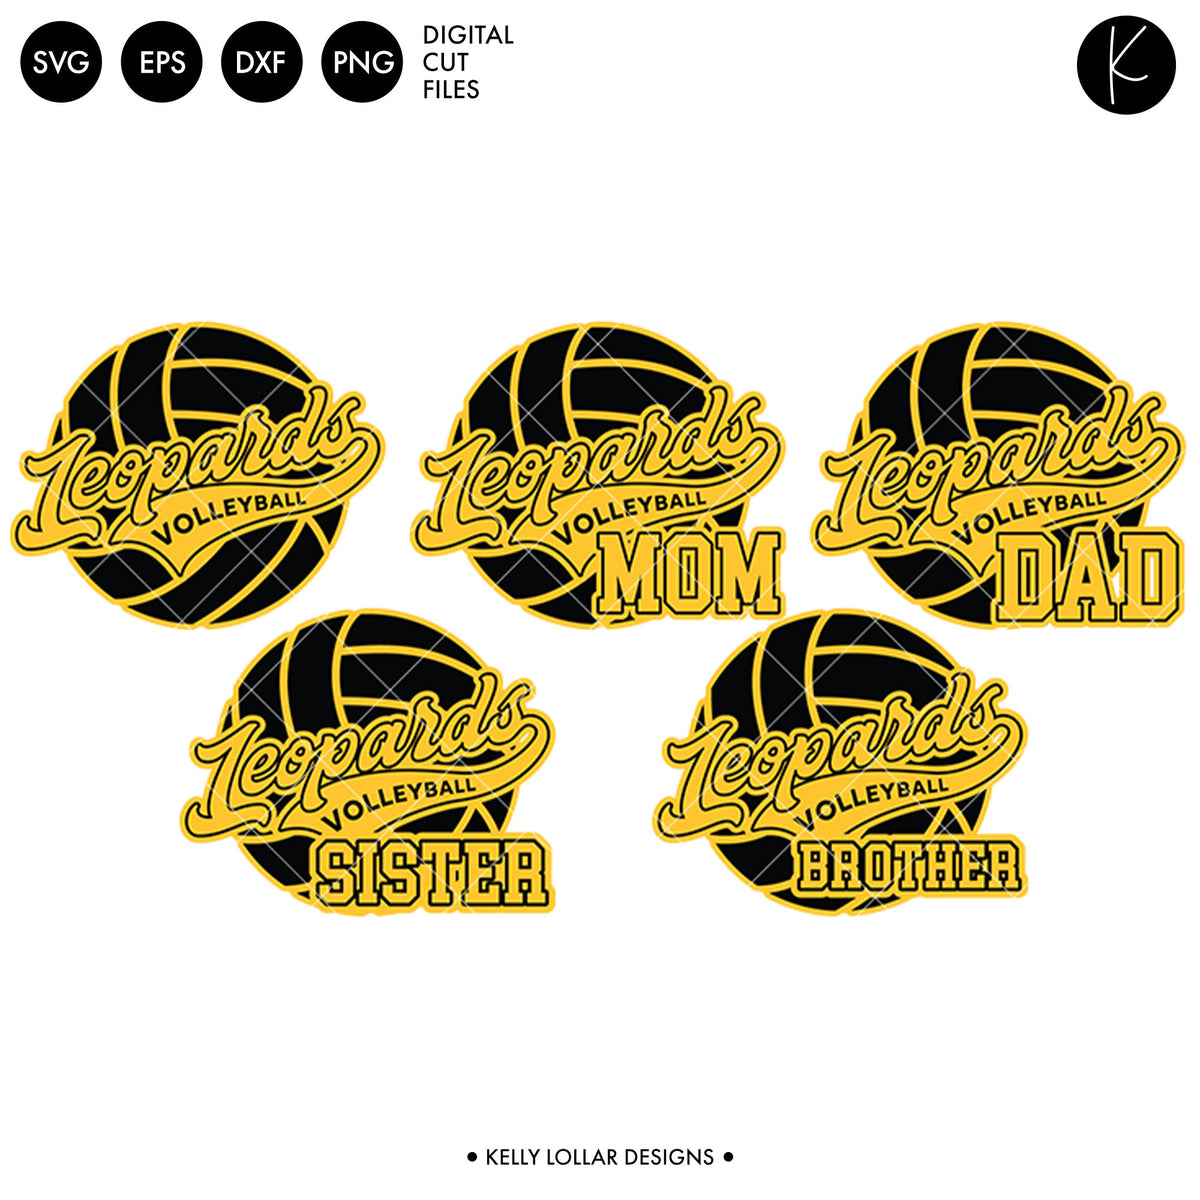 Leopards Volleyball Bundle | SVG DXF EPS PNG Cut Files